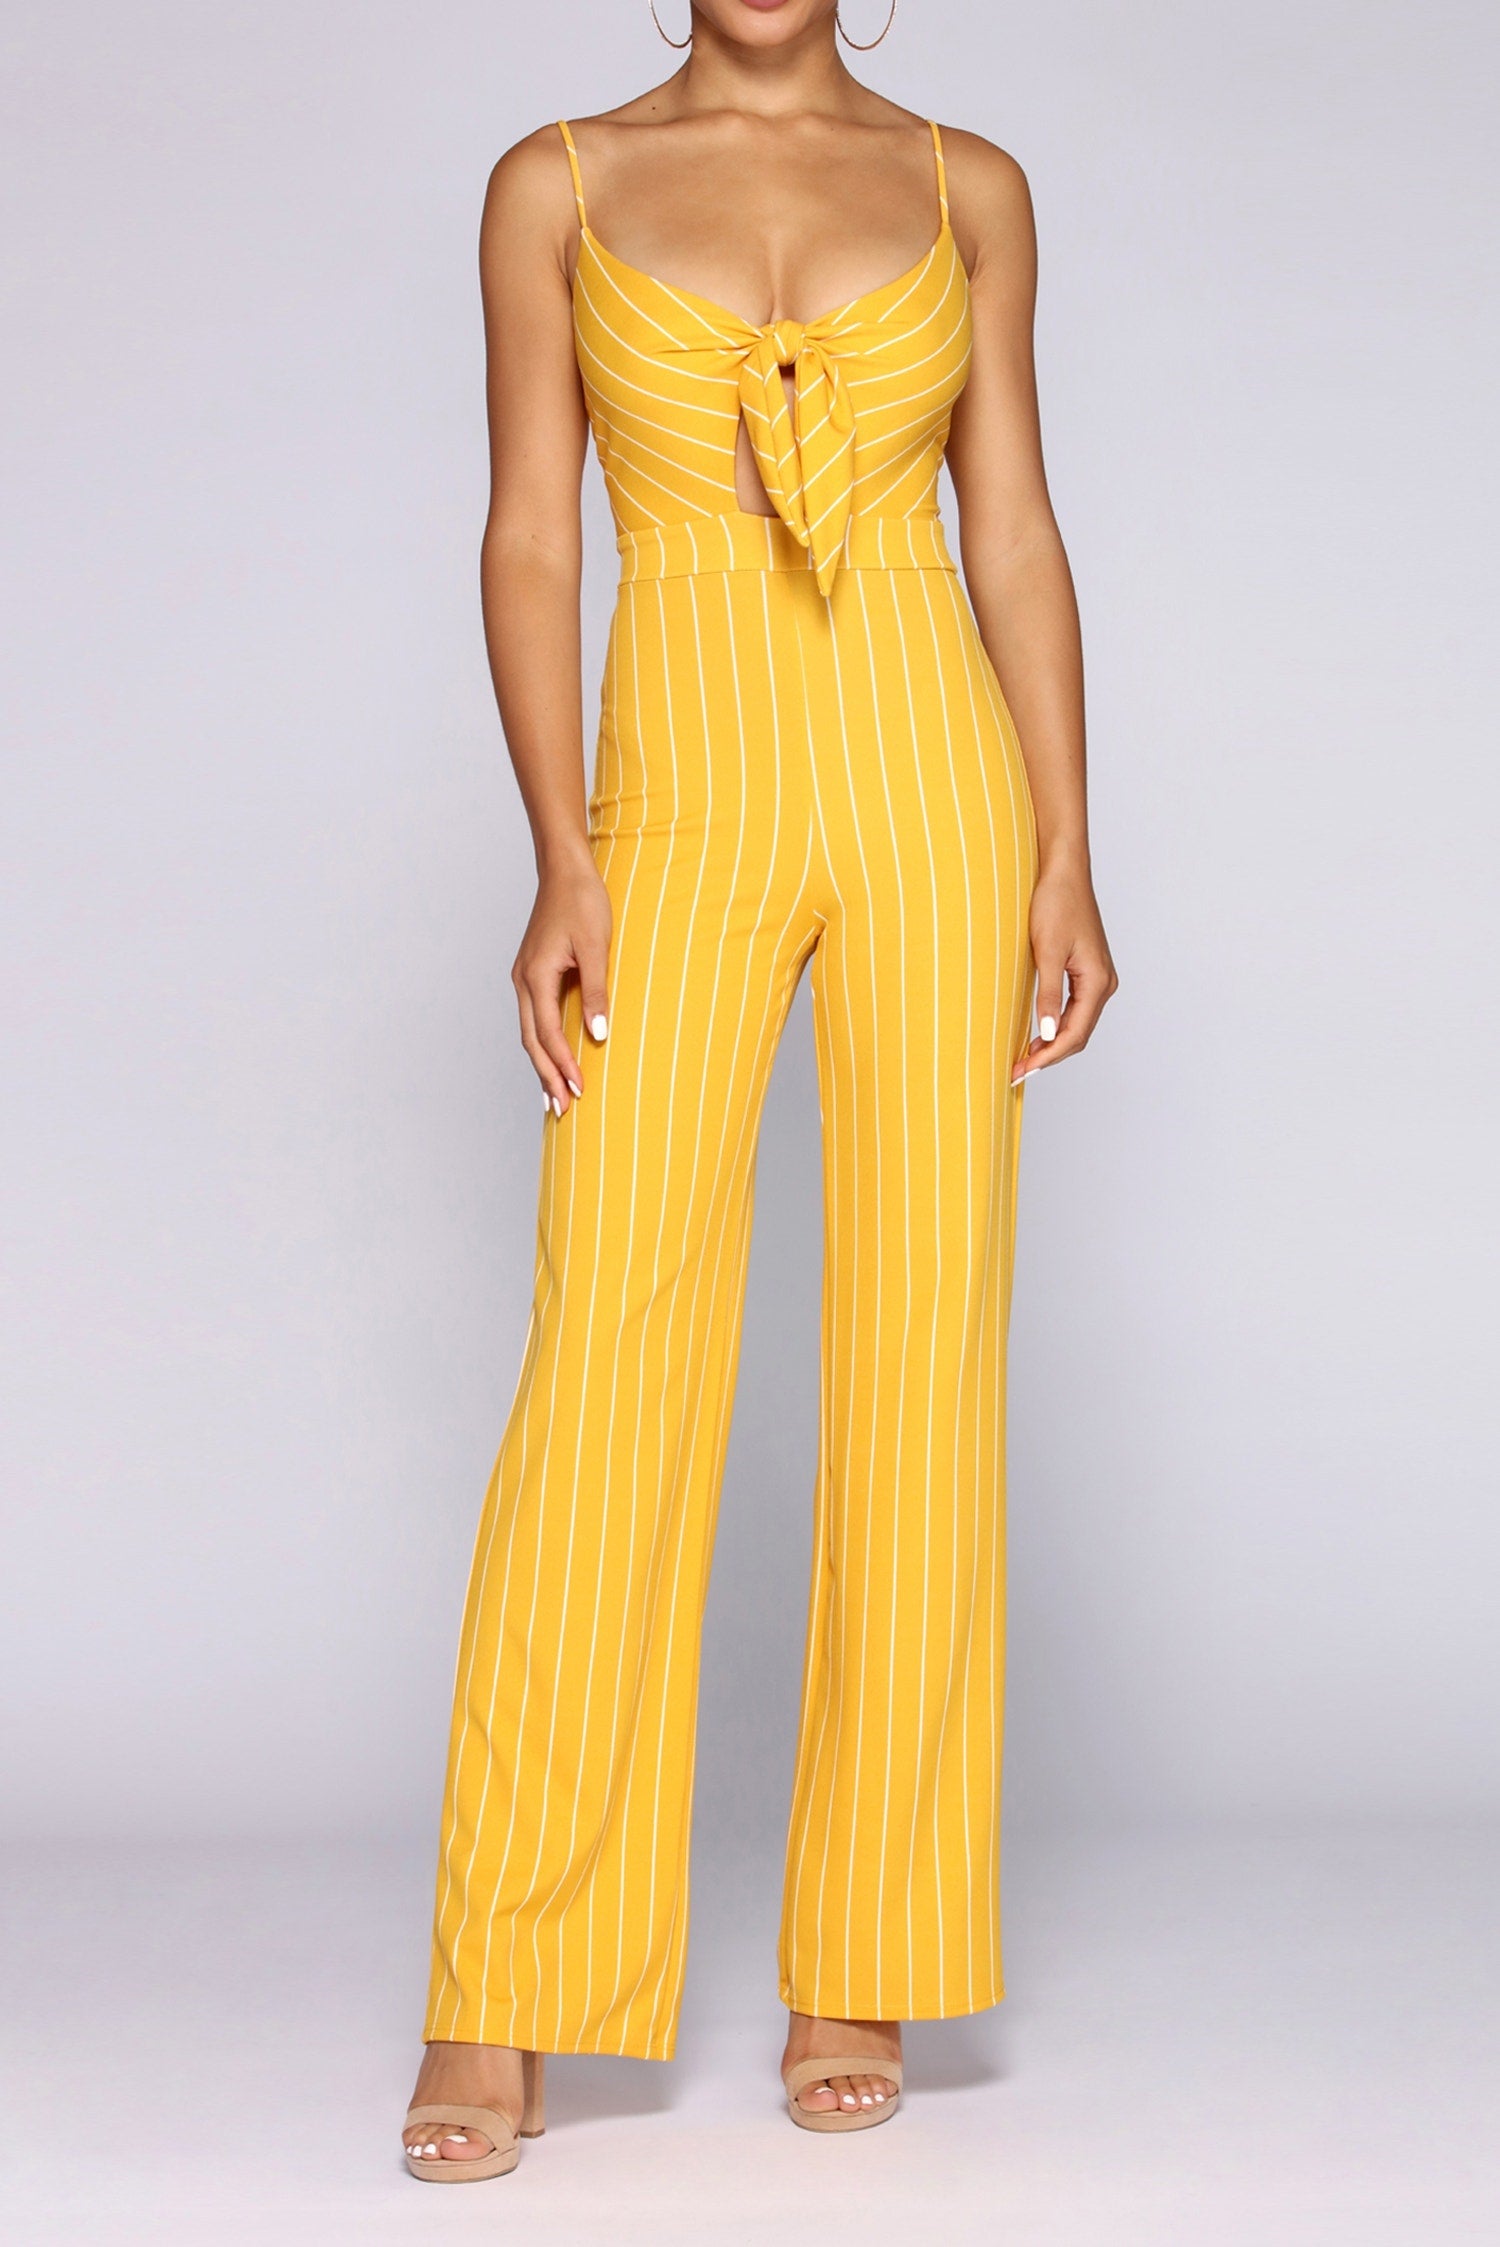 All For One Striped Jumpsuit